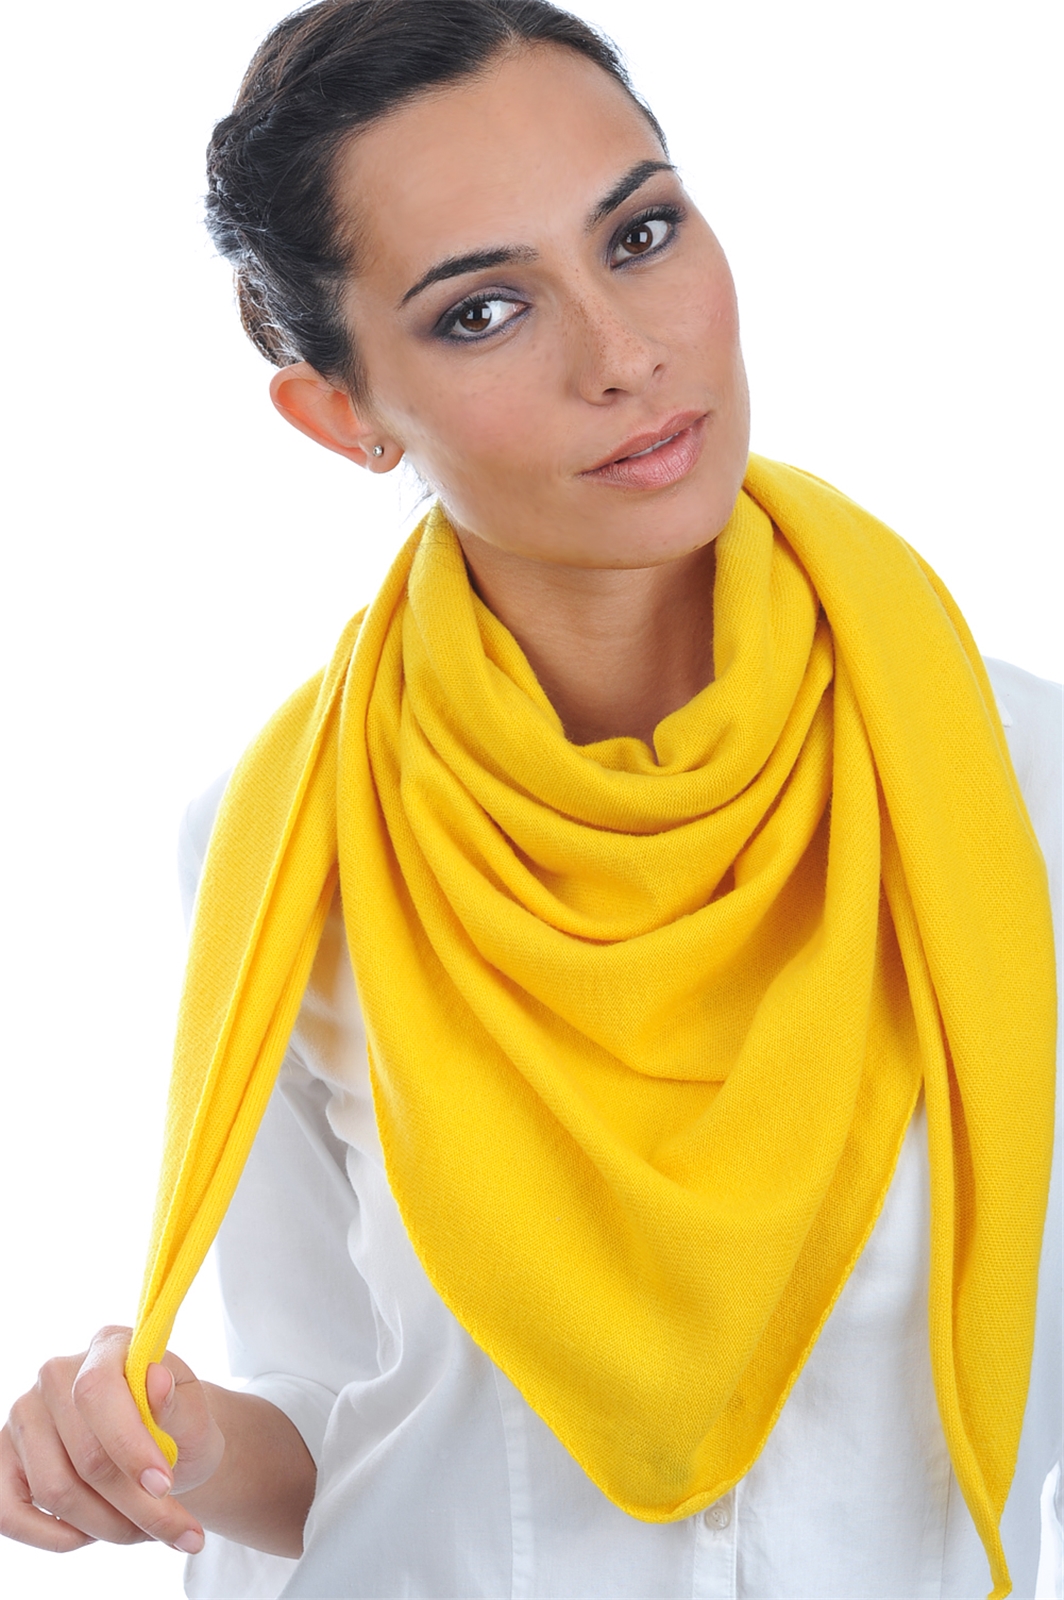 Cashmere ladies scarves mufflers argan cyber yellow one size